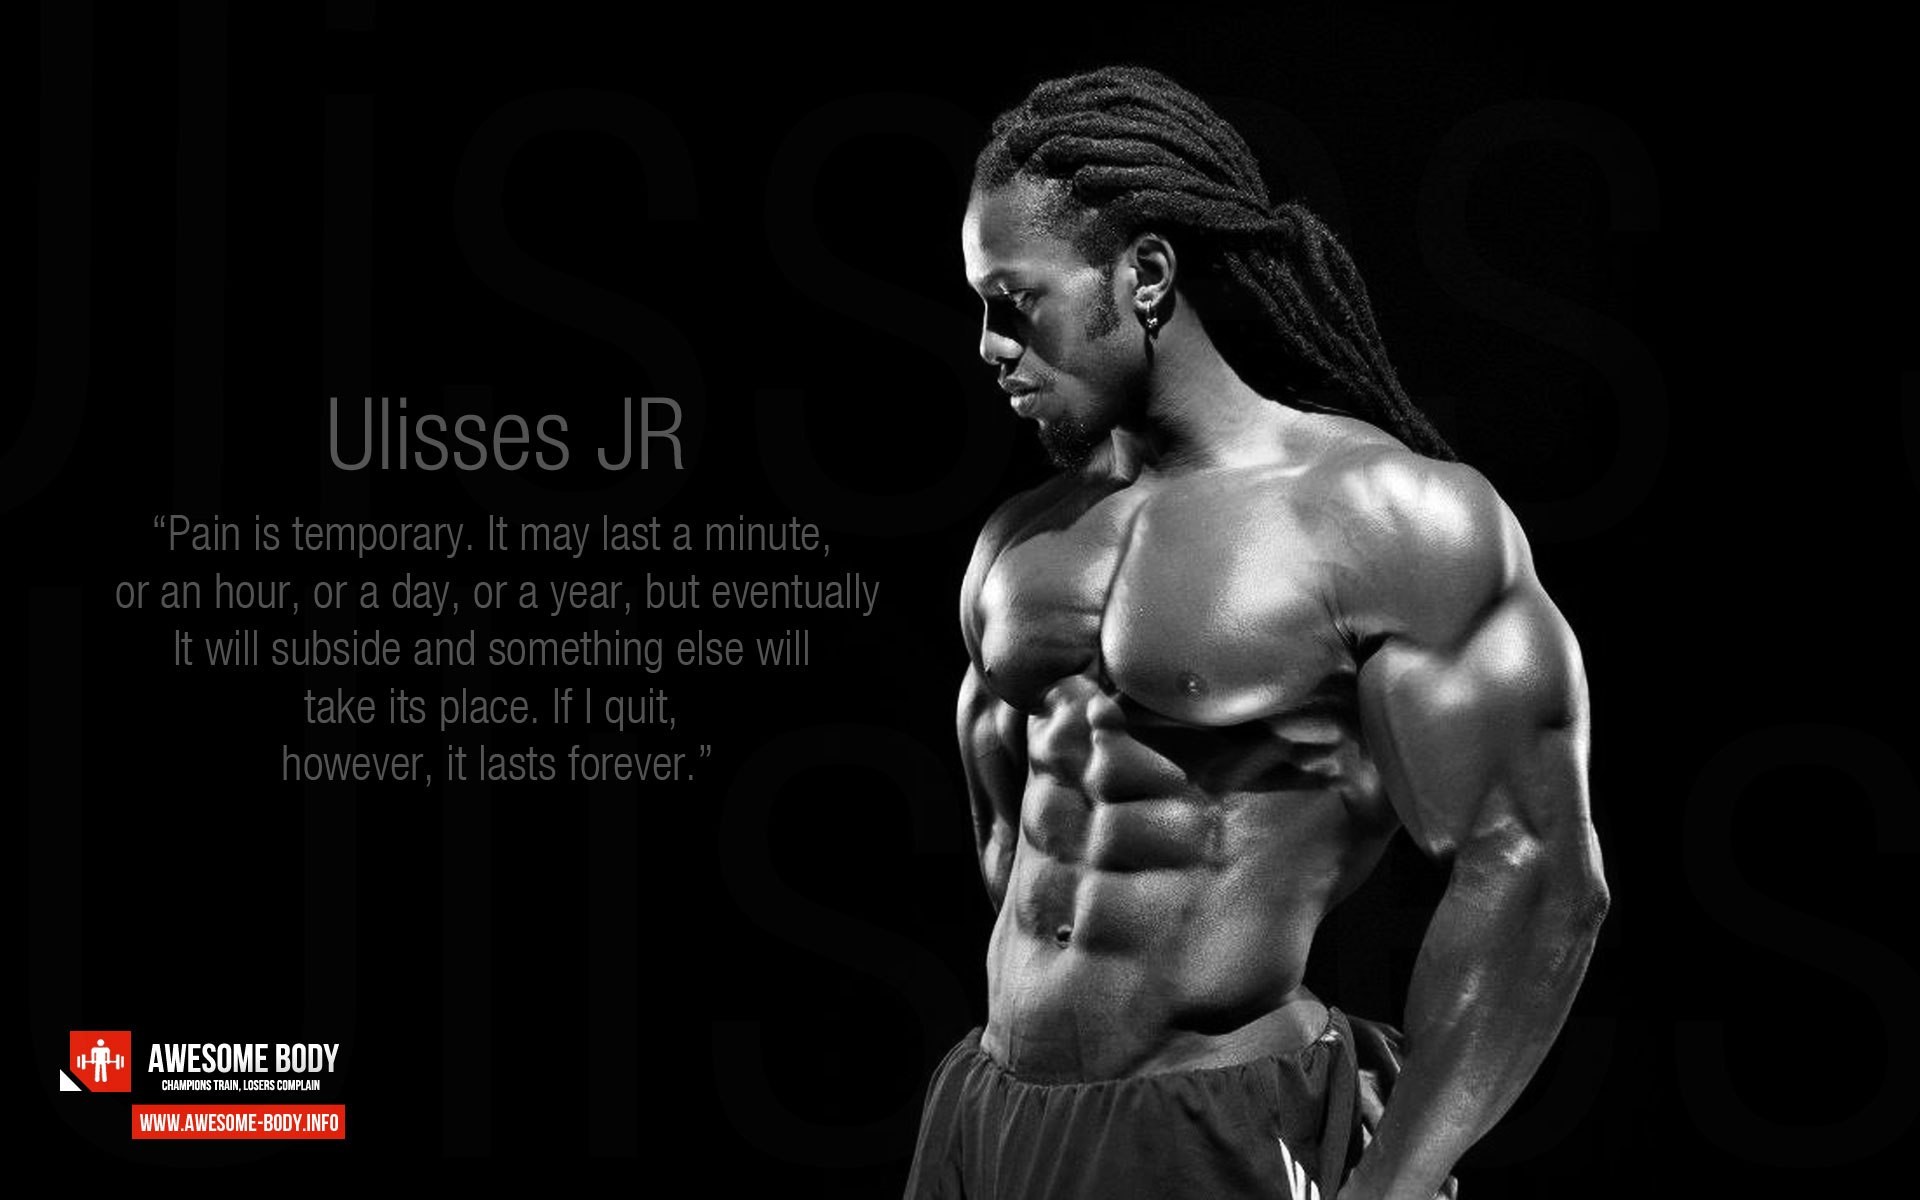 Ulisses JR Motivation awesome body wallpaper